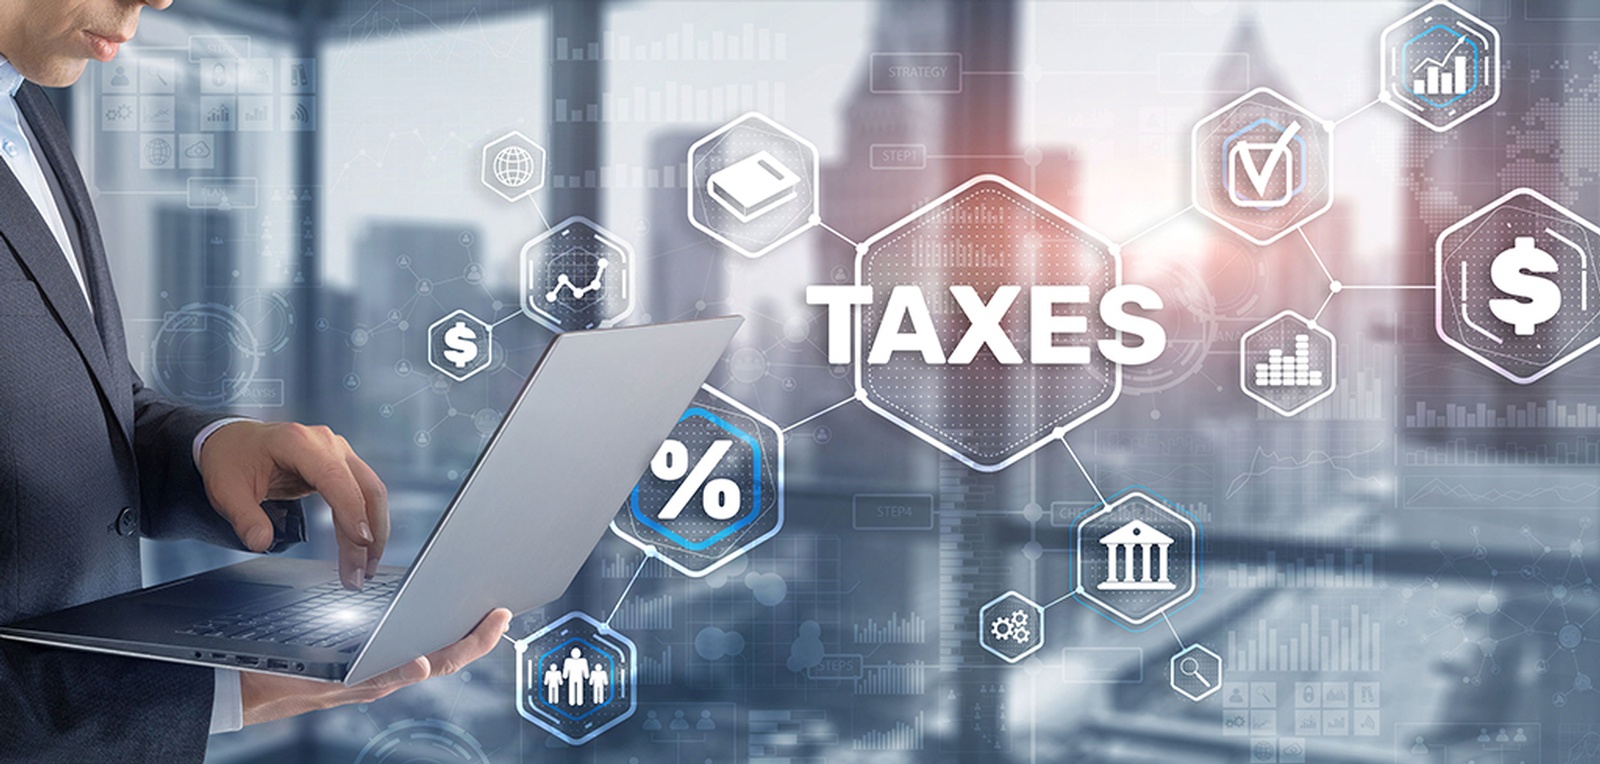 Corporate Tax Services - Tax Planning & Filing